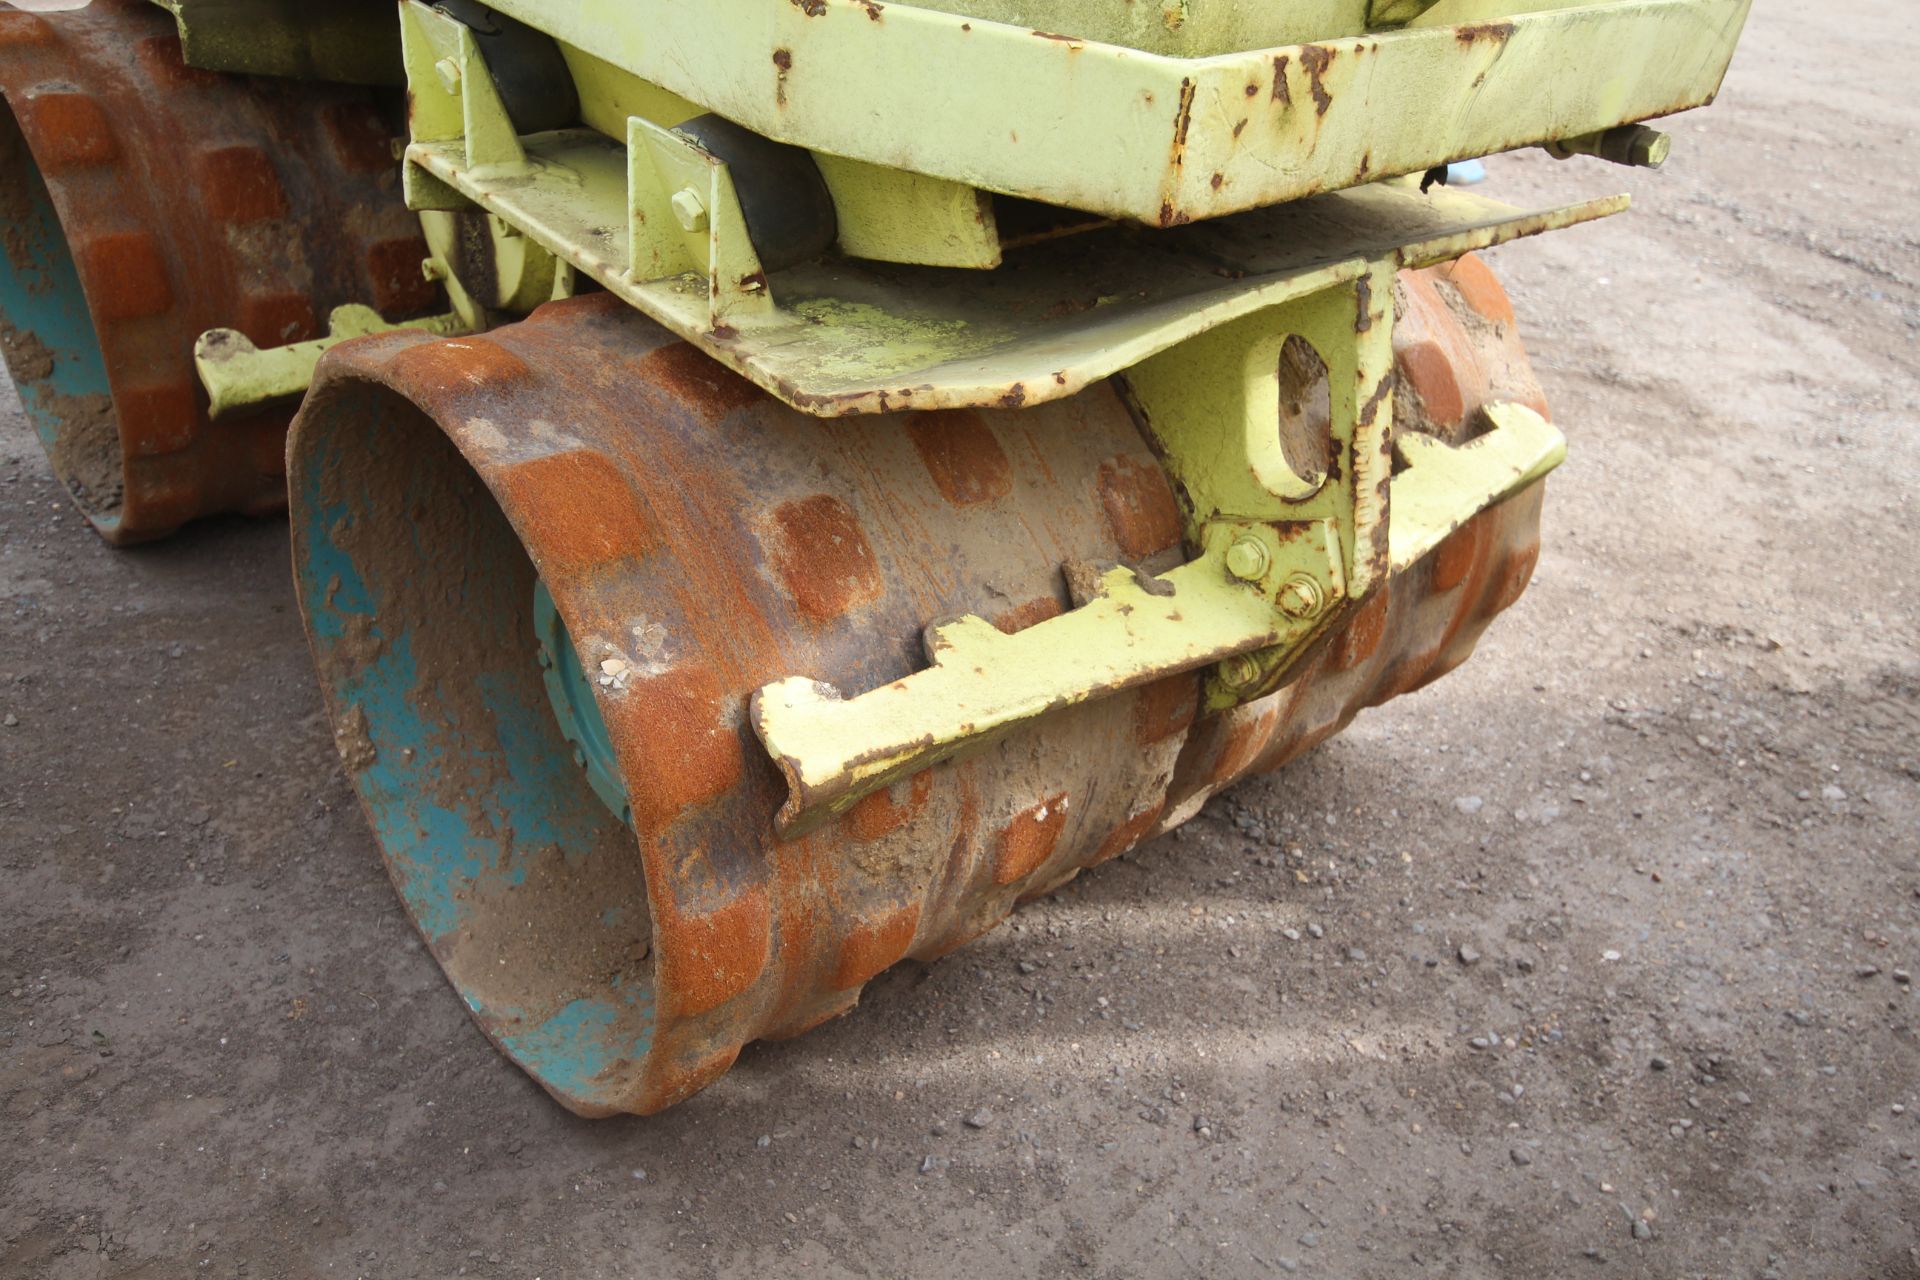 Rammax double drum trench roller. With Hatz diesel engine. Key held. V - Image 8 of 13